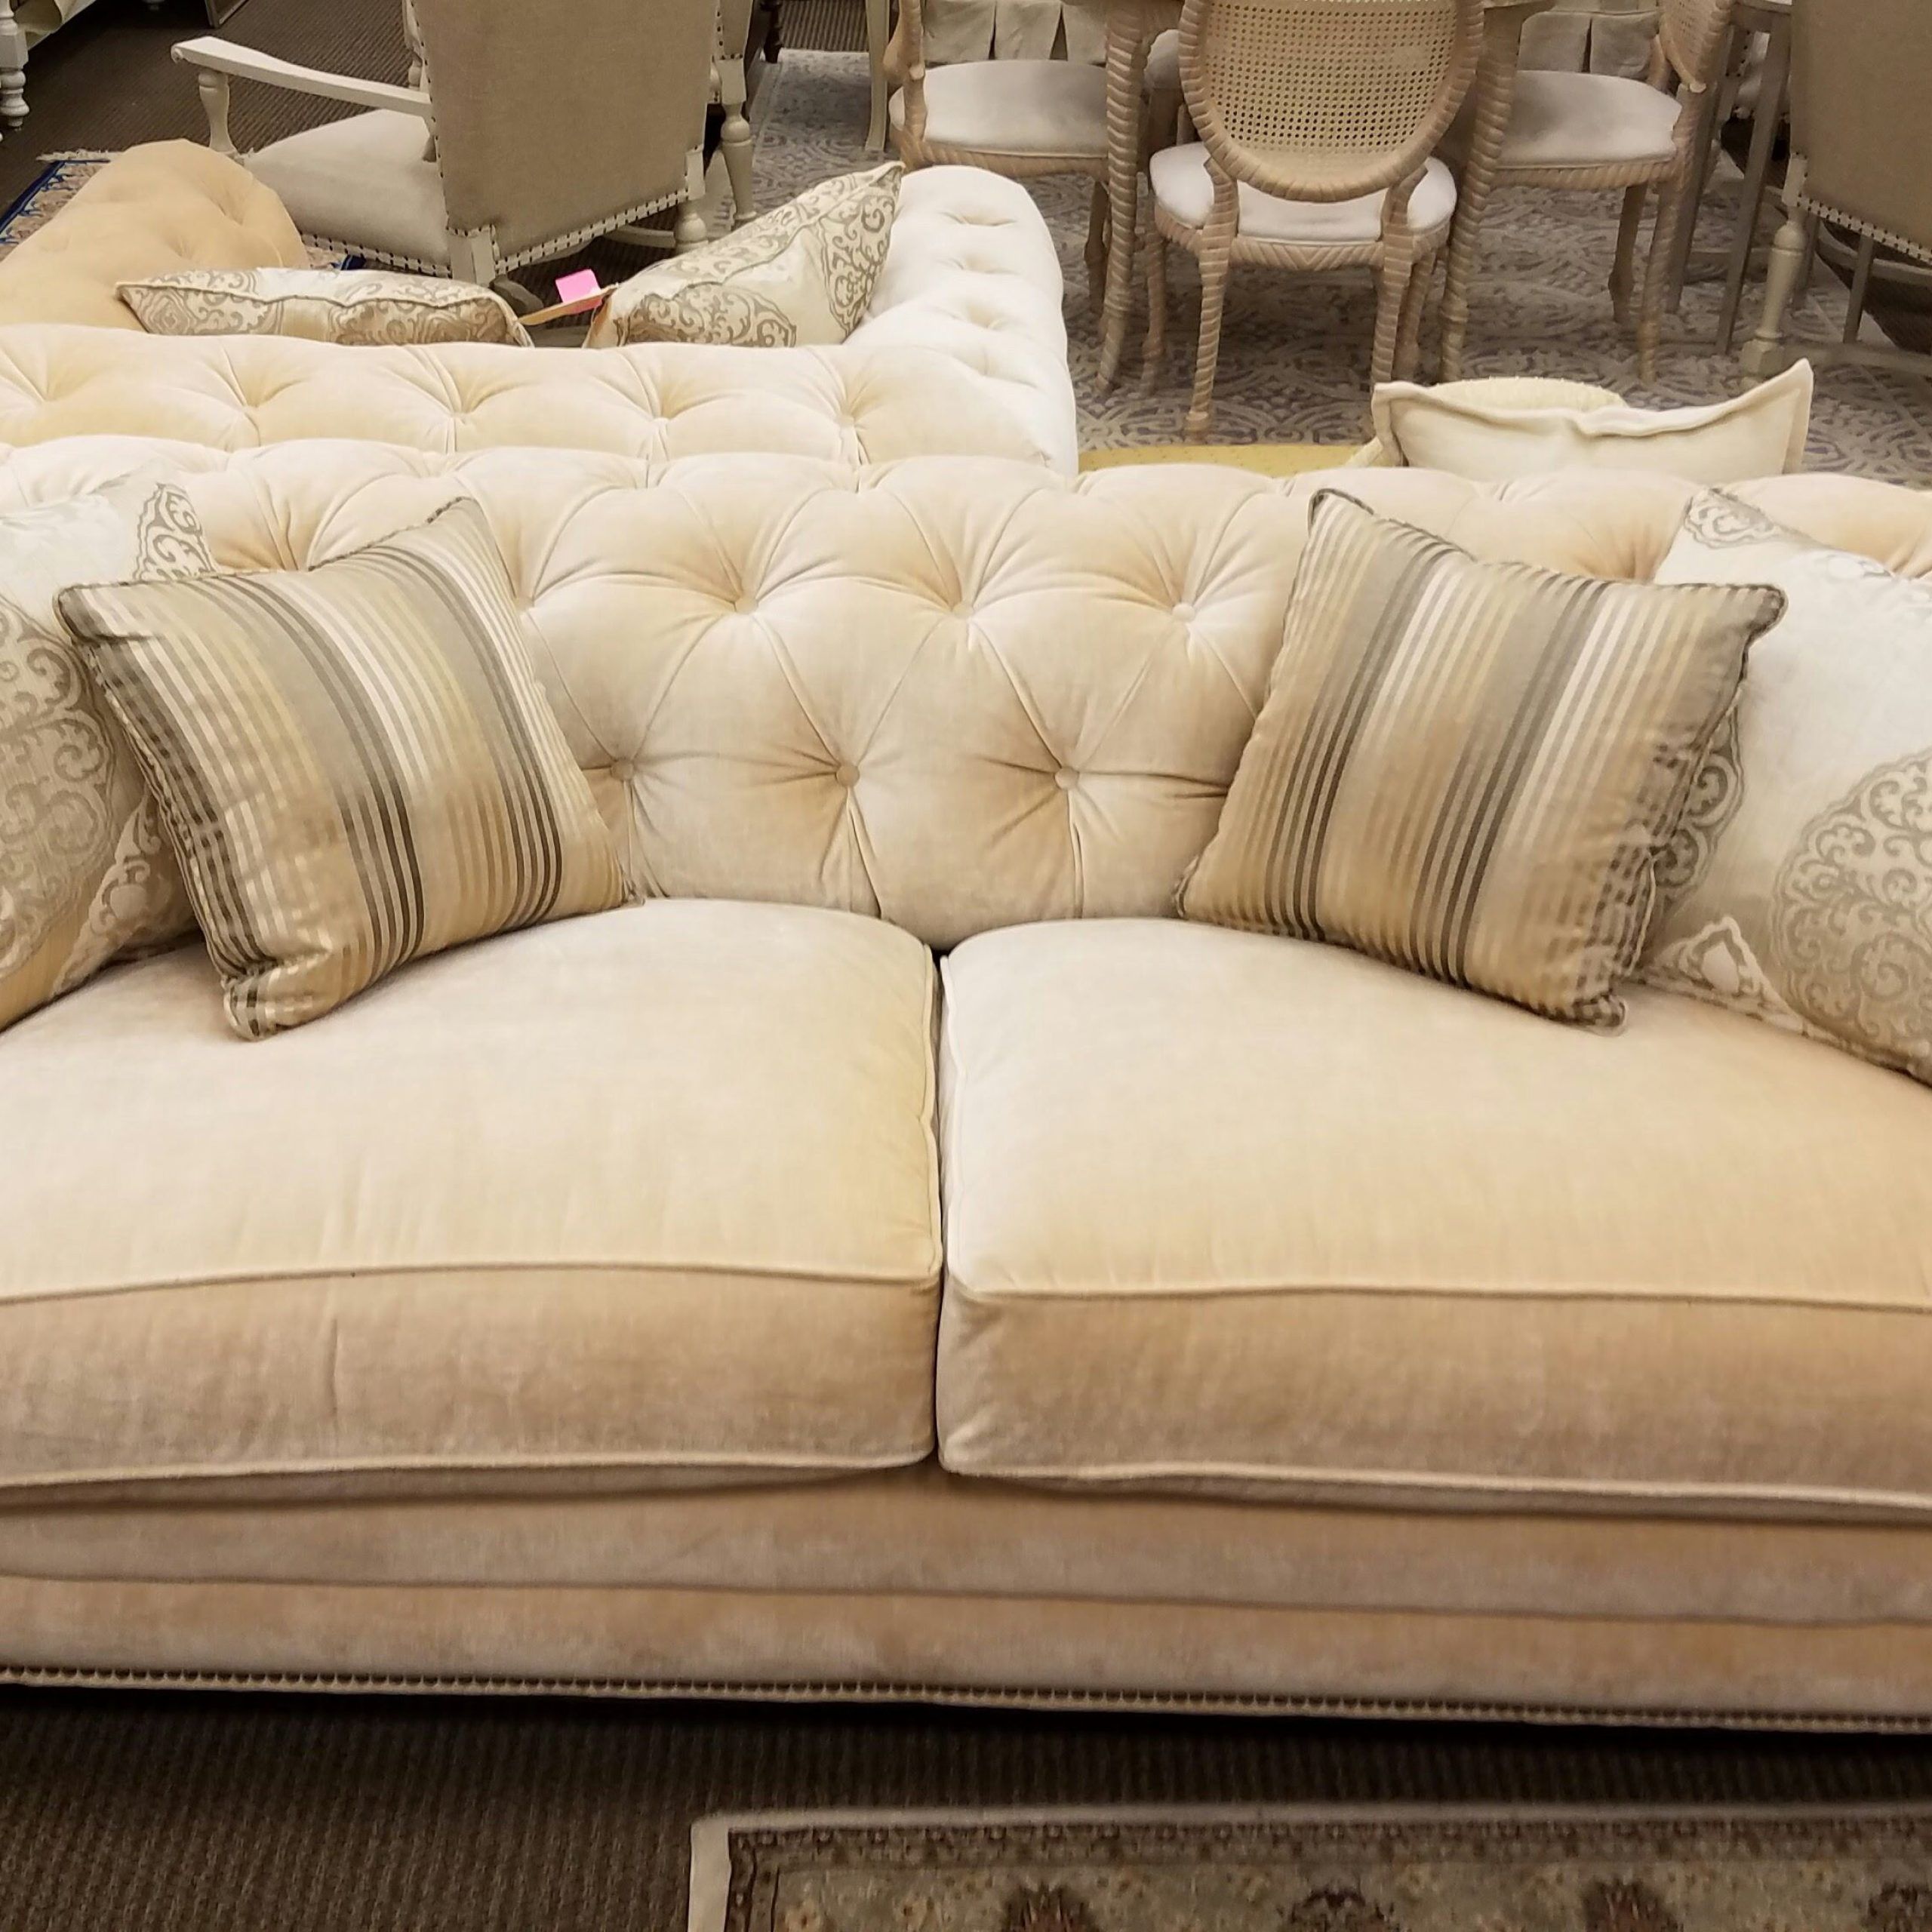 This Elegant Cream Tufted Sofa Is Priced At $ (View 3 of 20)